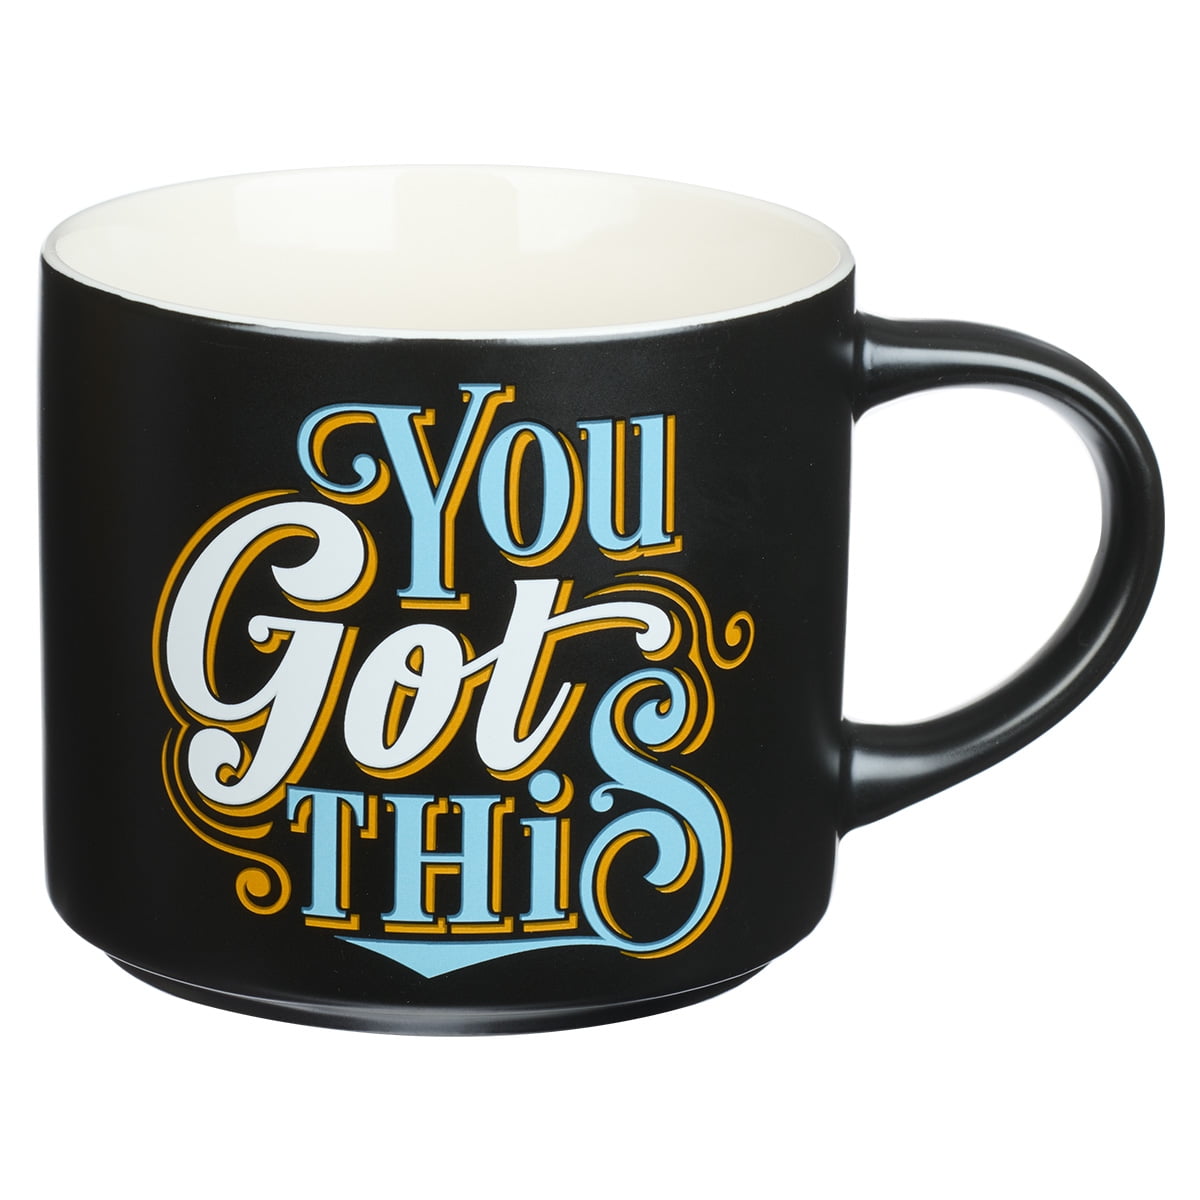 Bless Your Soul XL Extra Large Blue Coffee Mug I Peopled Yesterday, Funny Birthday Gifts for Women/Men, Mom, Dad Co-Worker, R